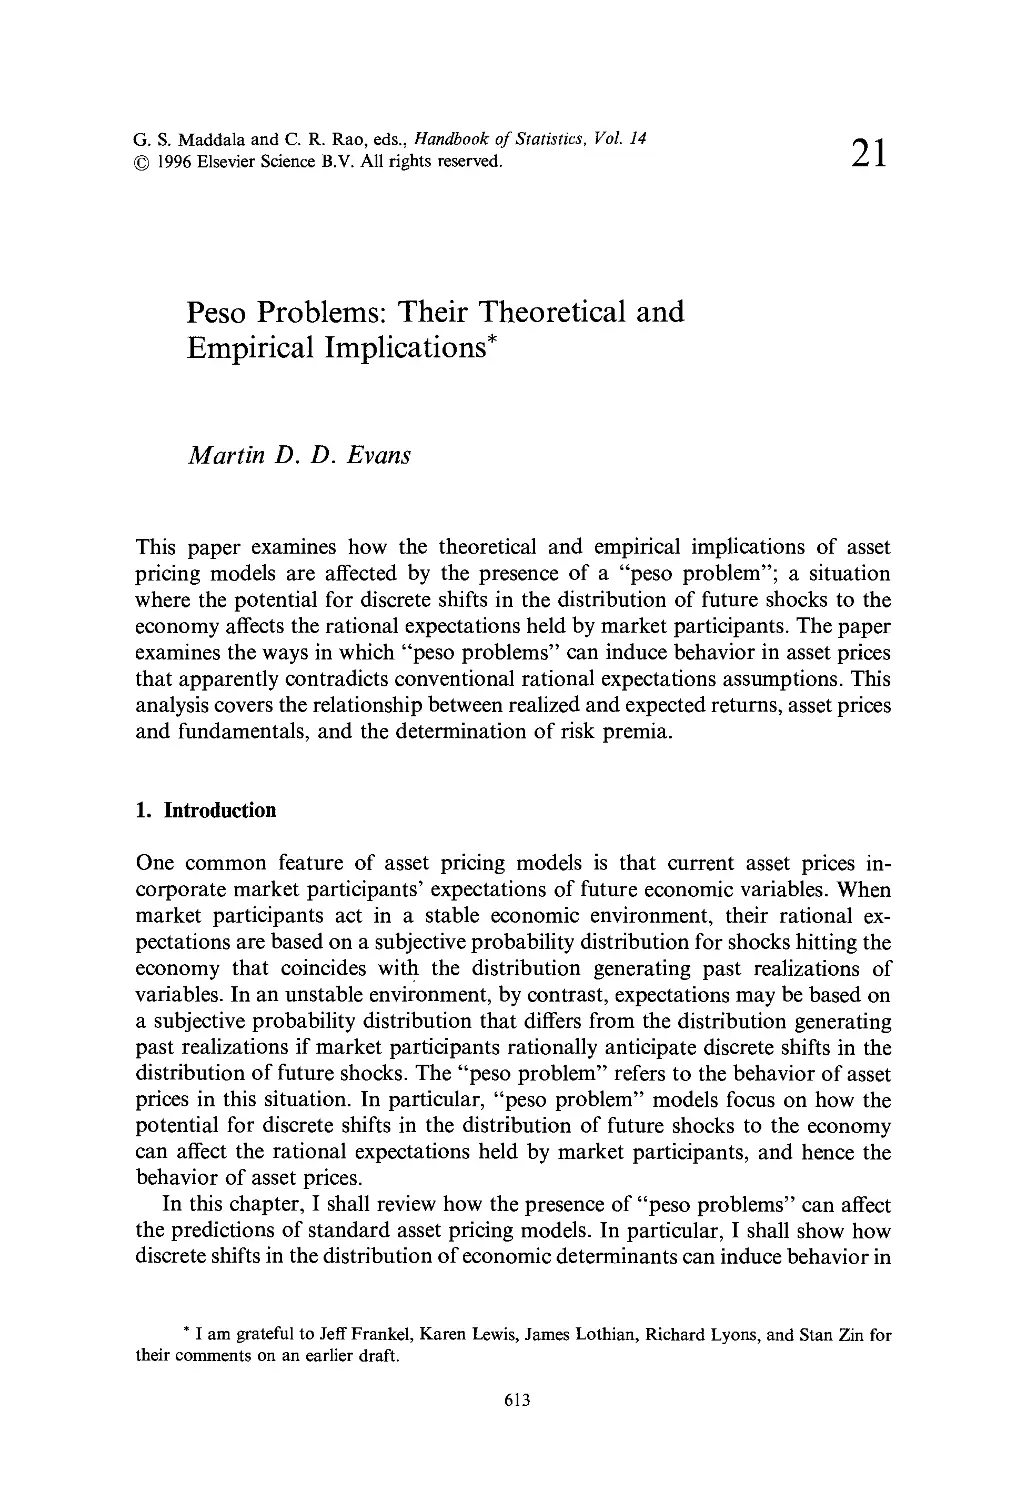 21. Peso Problems: Their Theoretical and Empirical Implications